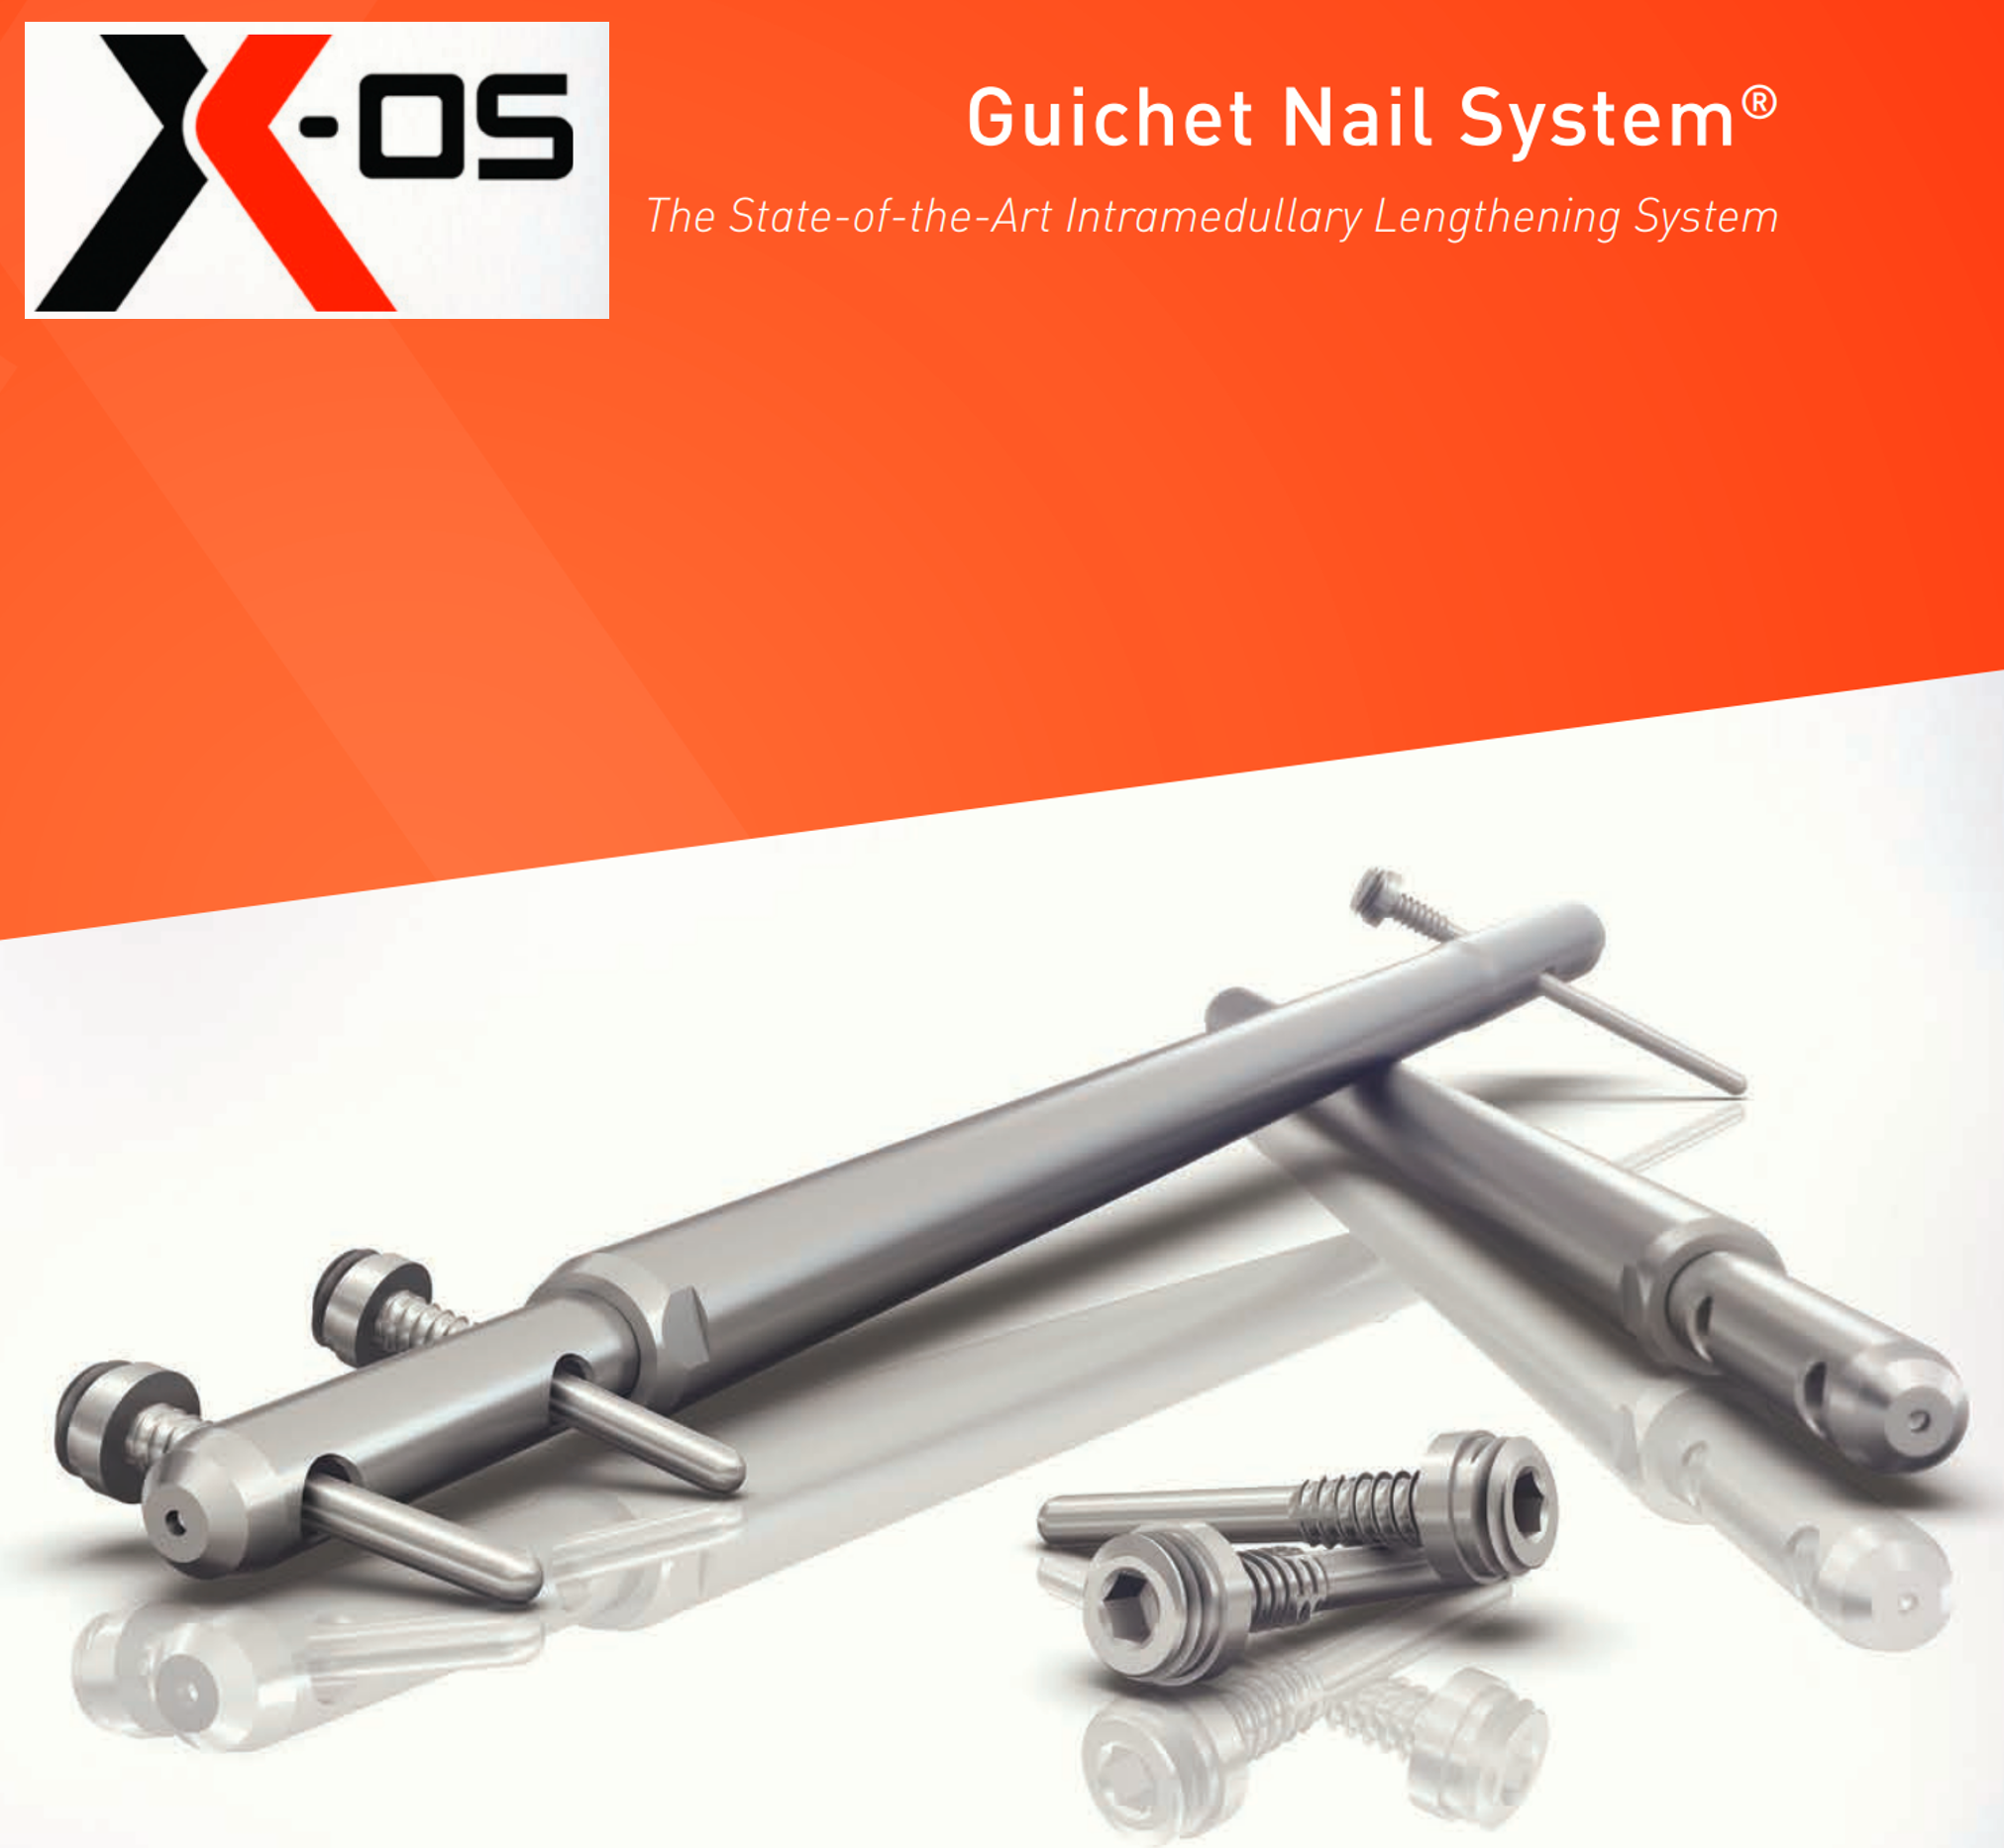 Introduction of  X-os G-(Guichet) Nail